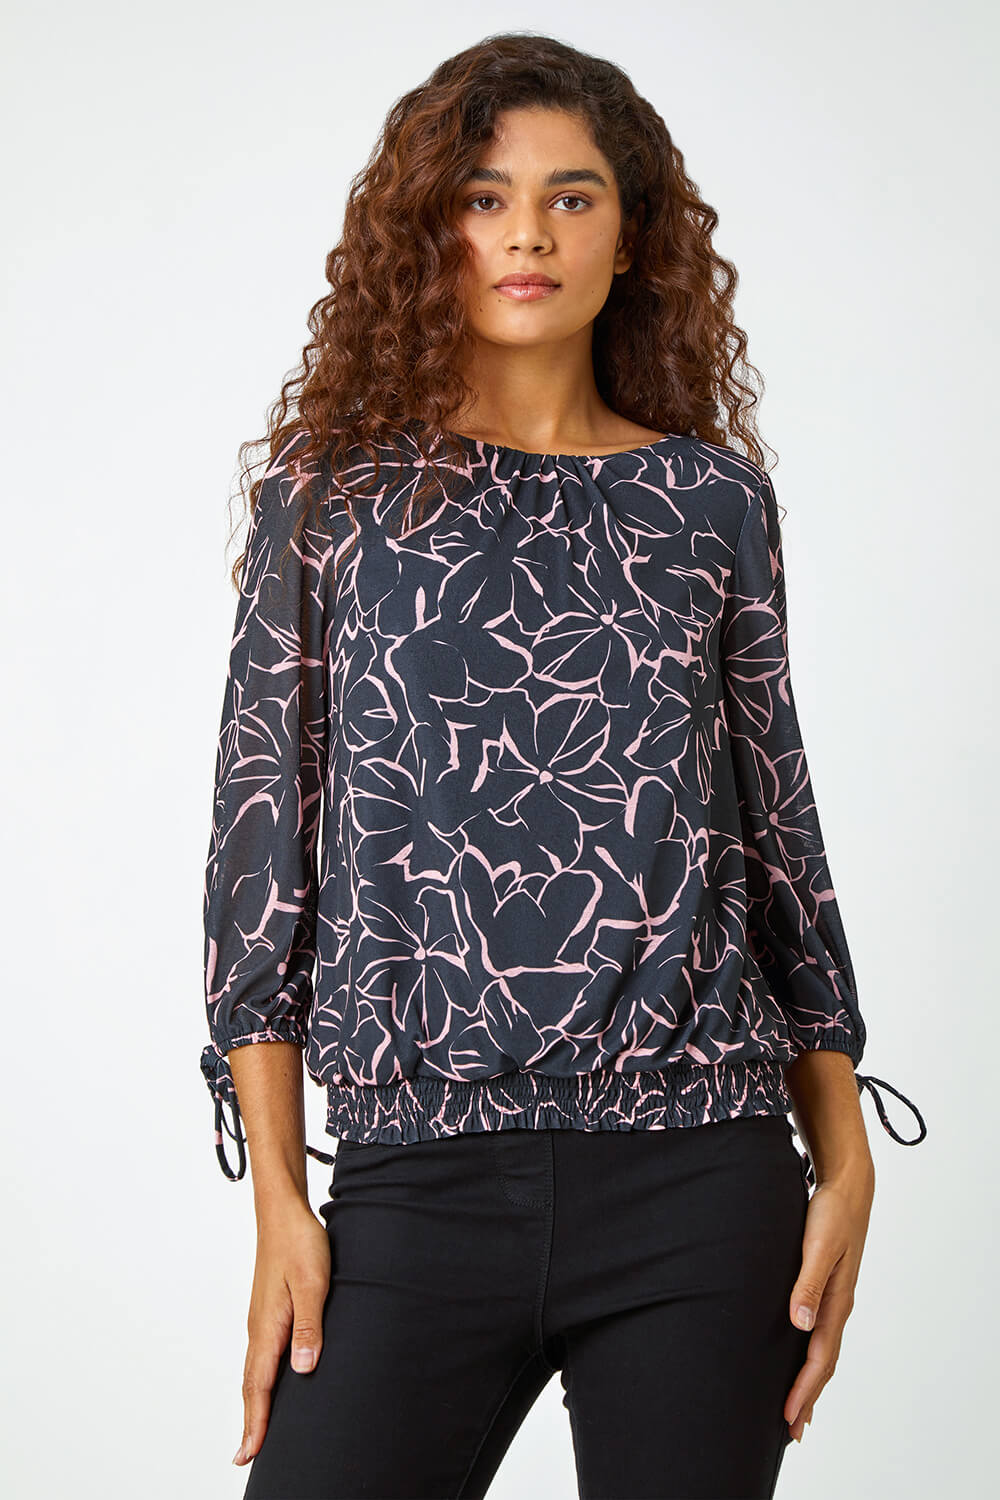 Light Pink Floral Print Blouson Stretch Top, Image 4 of 5